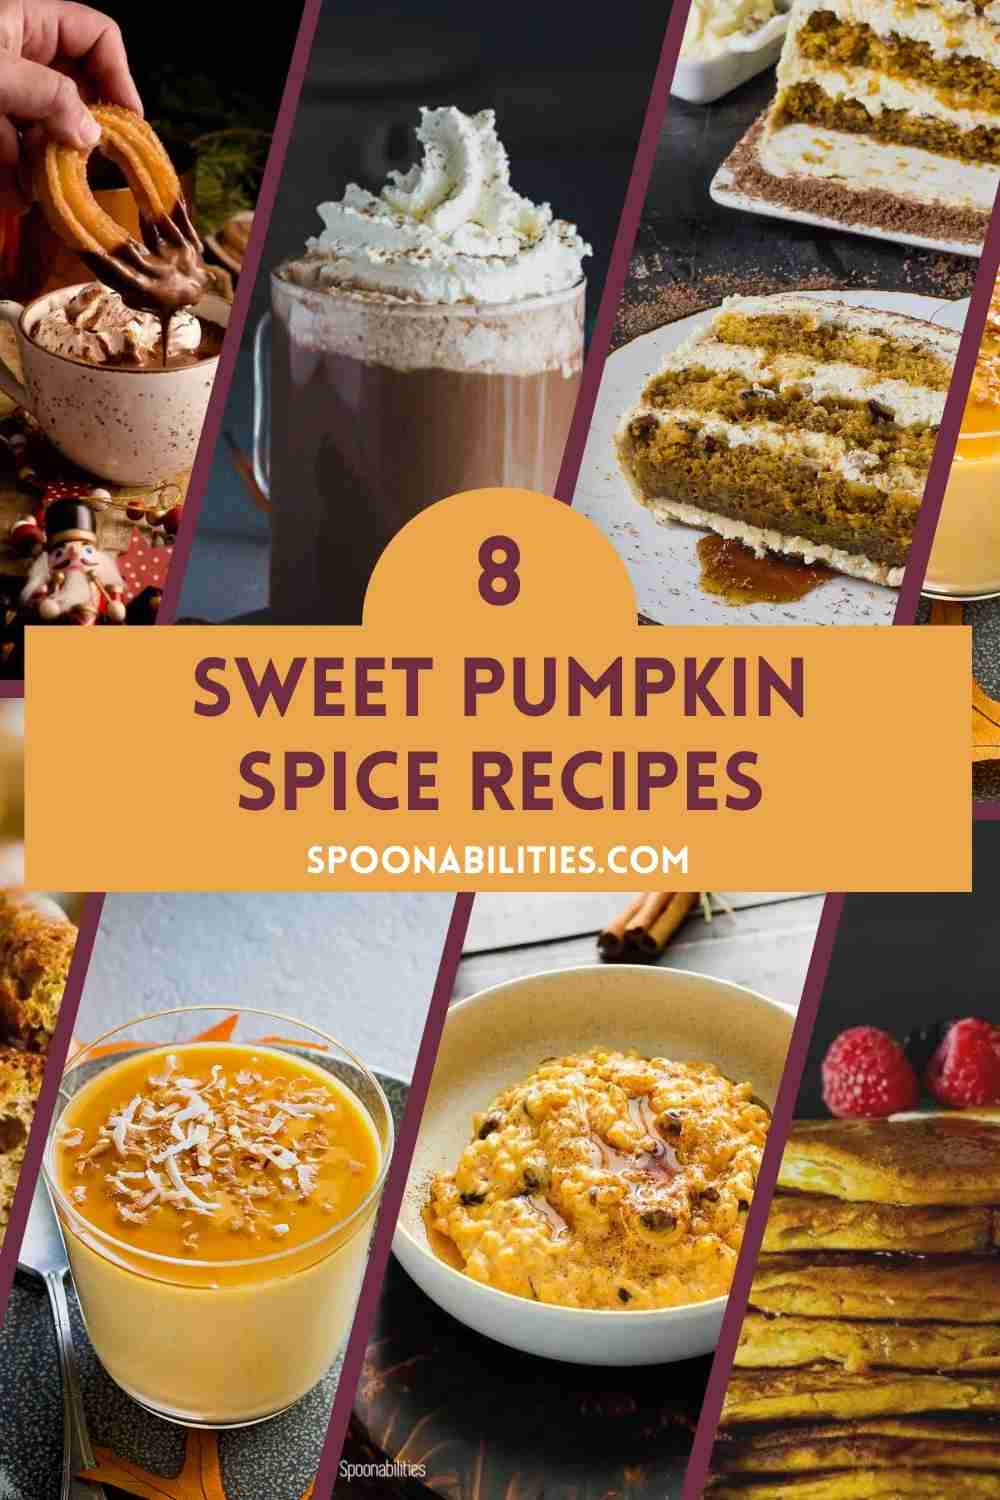 8 Sweet Pumpkin Spice Recipes you will want to make